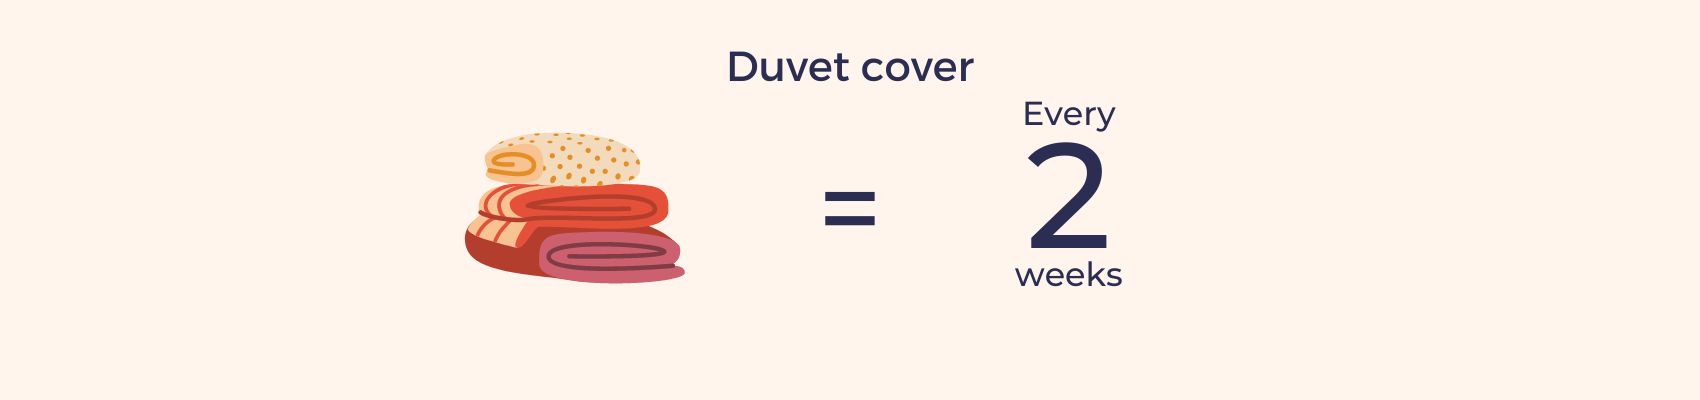 Duvet cover cleaning